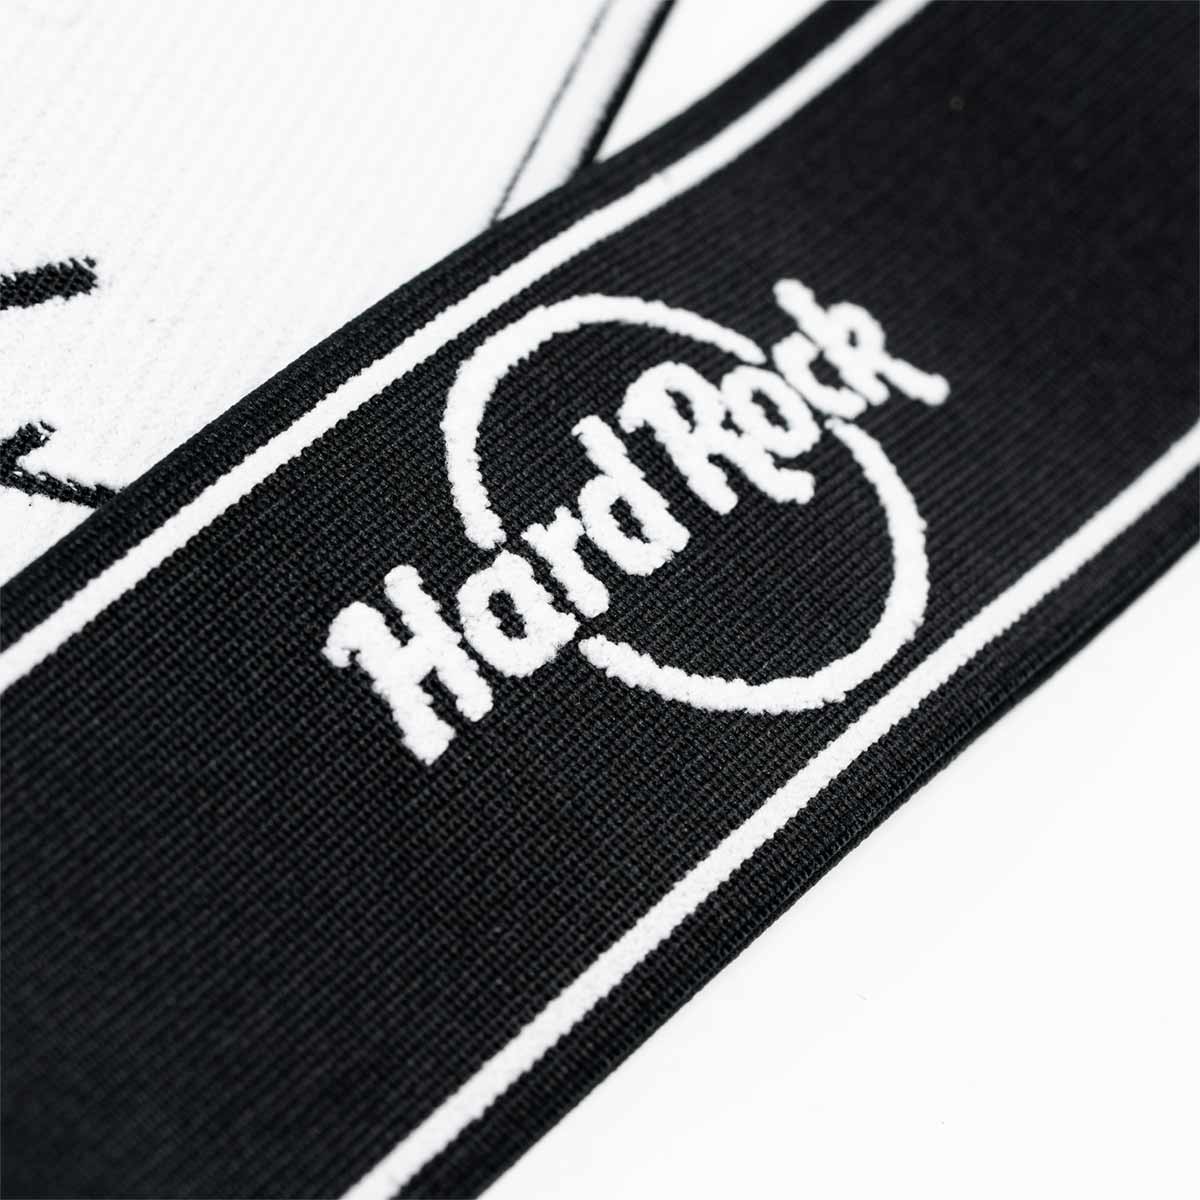 Fender x Hard Rock Weightless Guitar Strap in Black and White image number 5